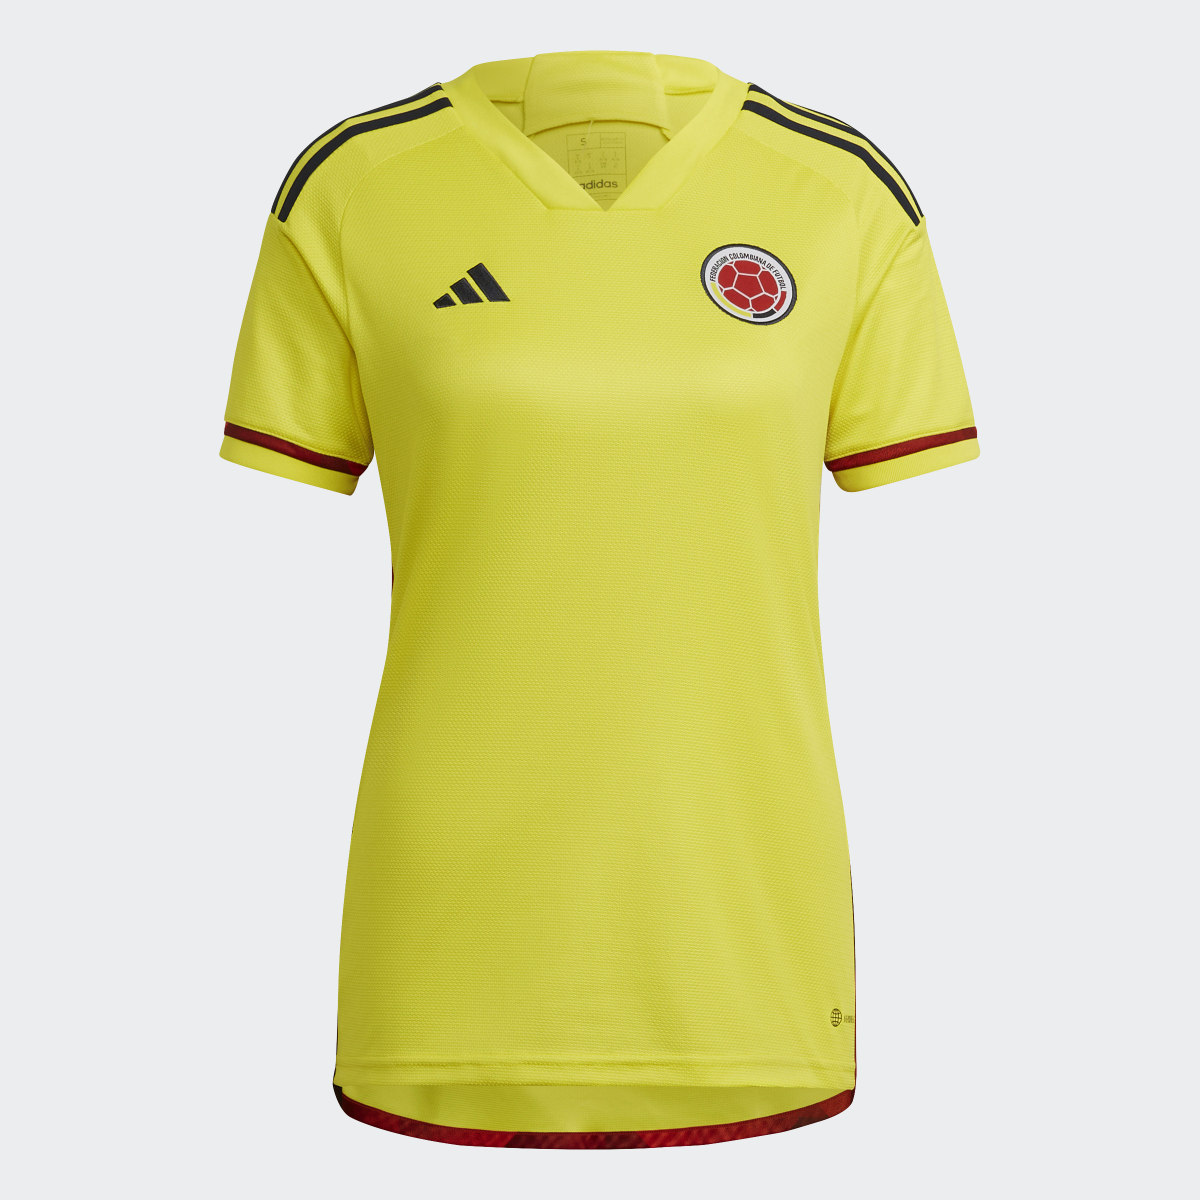 Adidas Maillot Colombie 22 Domicile. 5